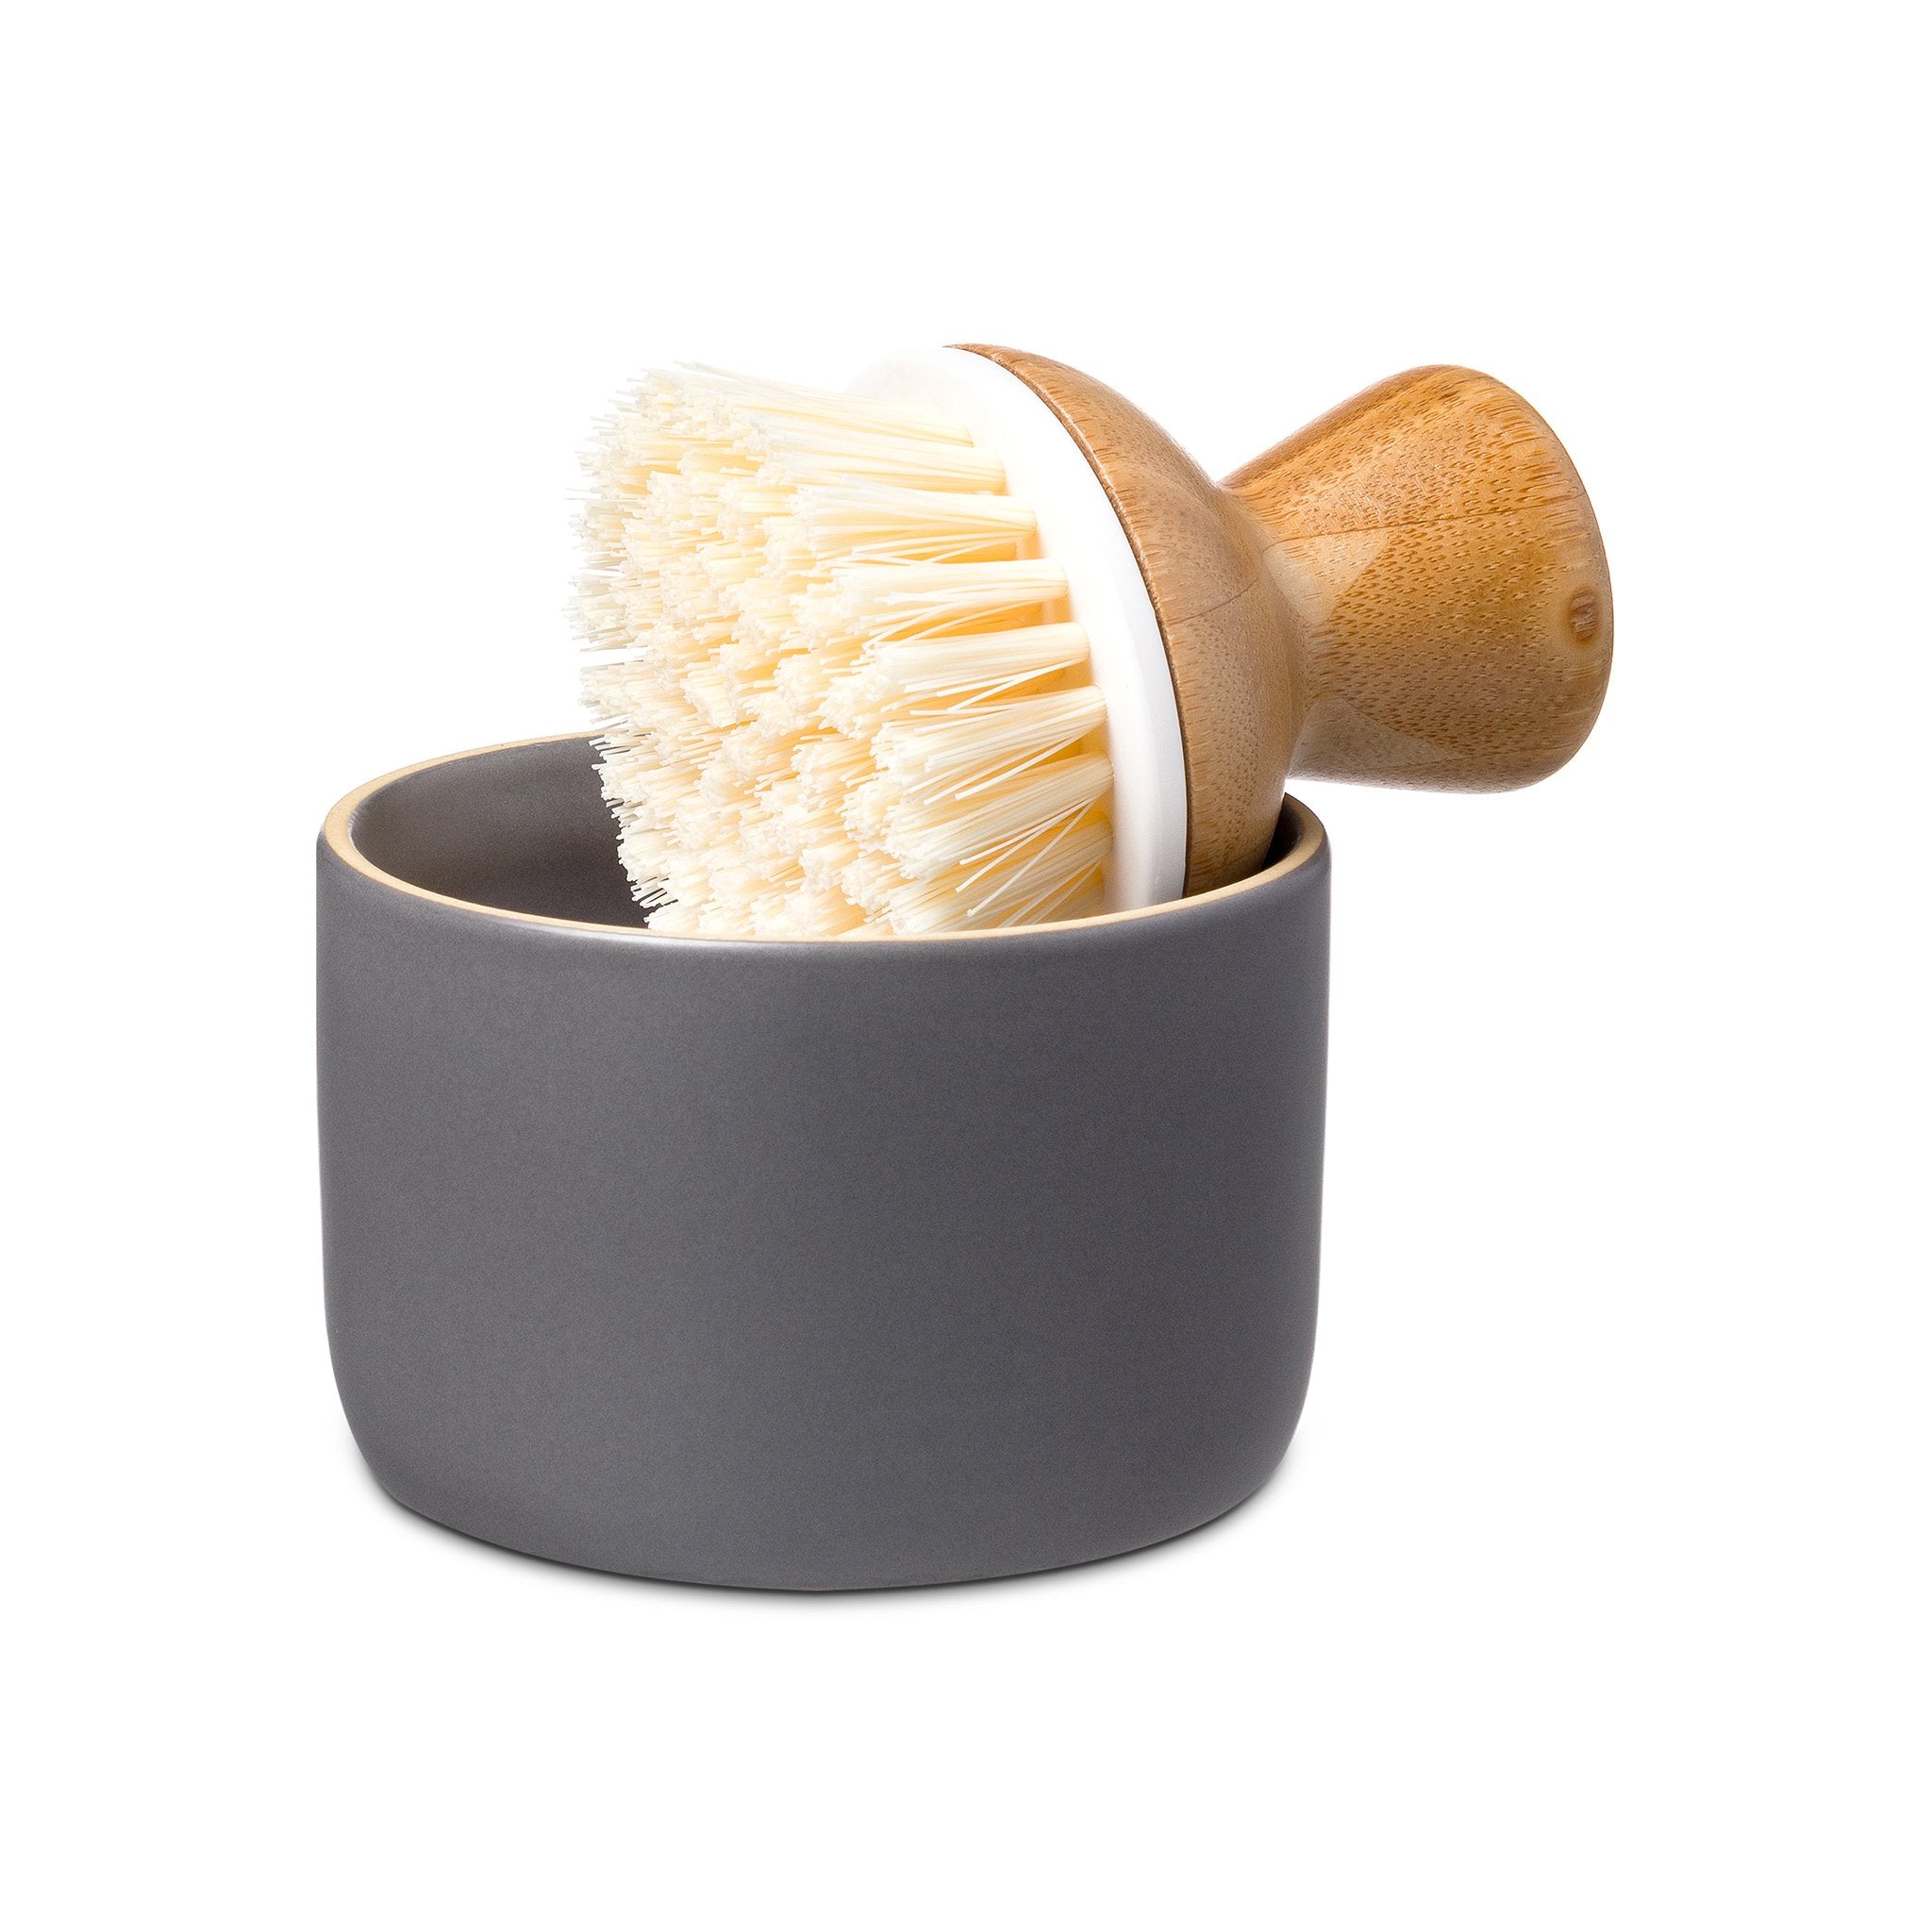 Refillable hand dish brush - With pump button